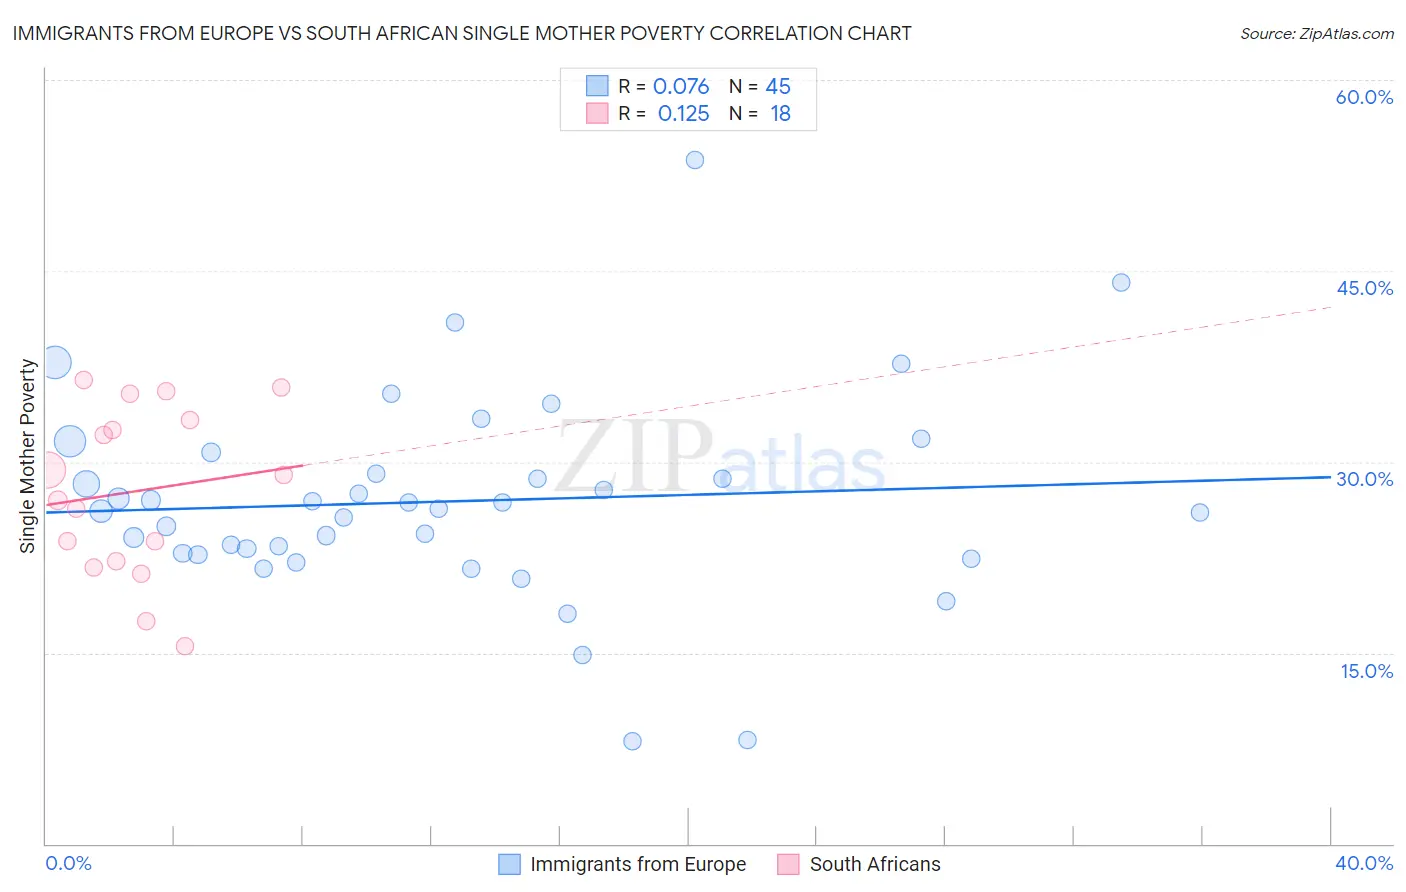 Immigrants from Europe vs South African Single Mother Poverty